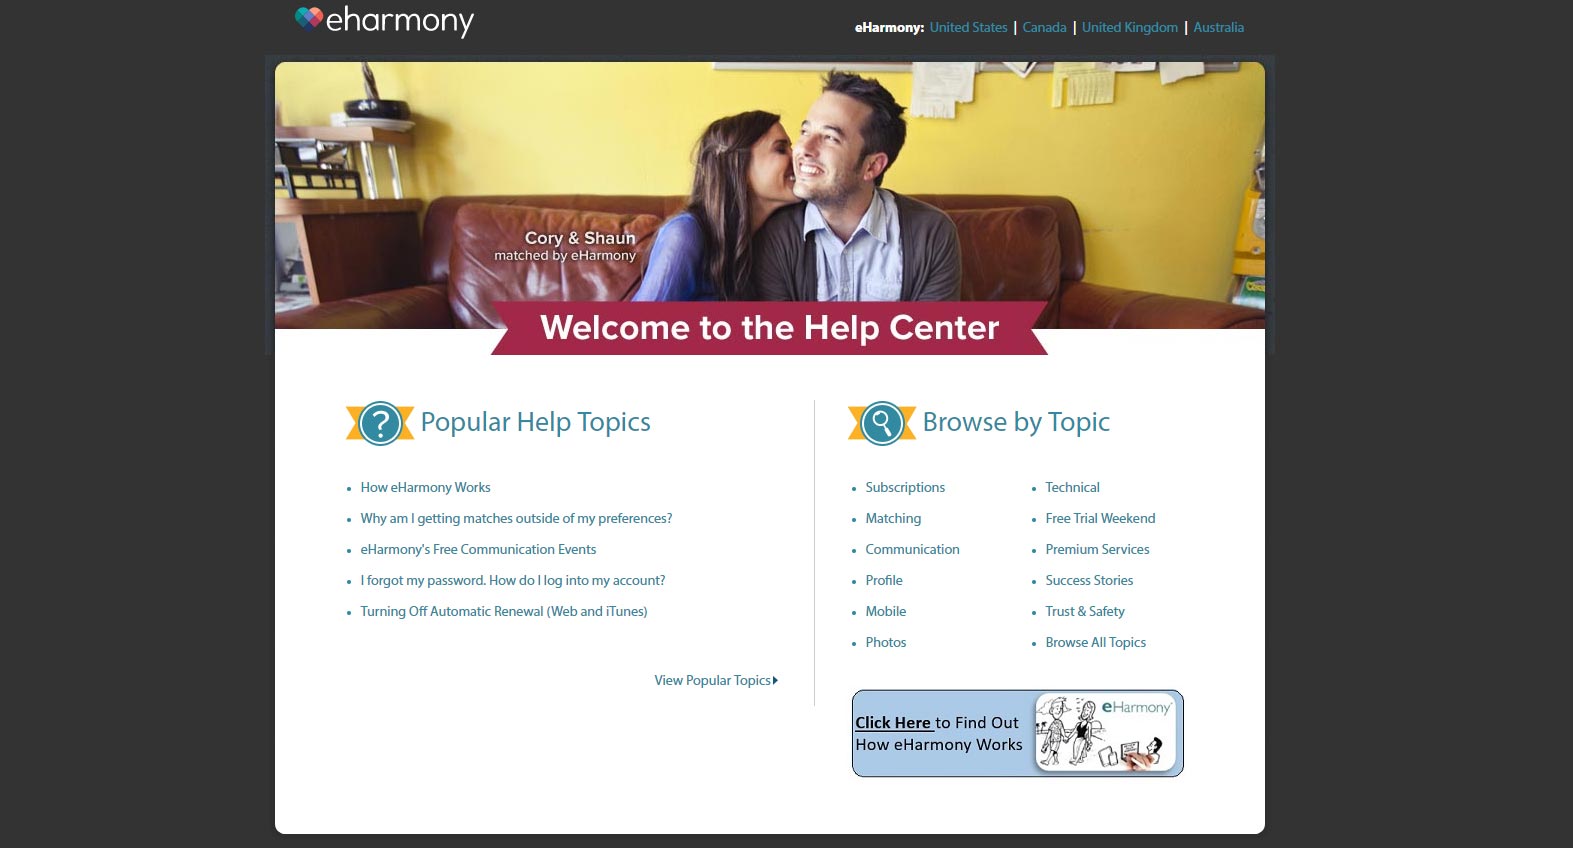 eHarmony help page image for international dating site review